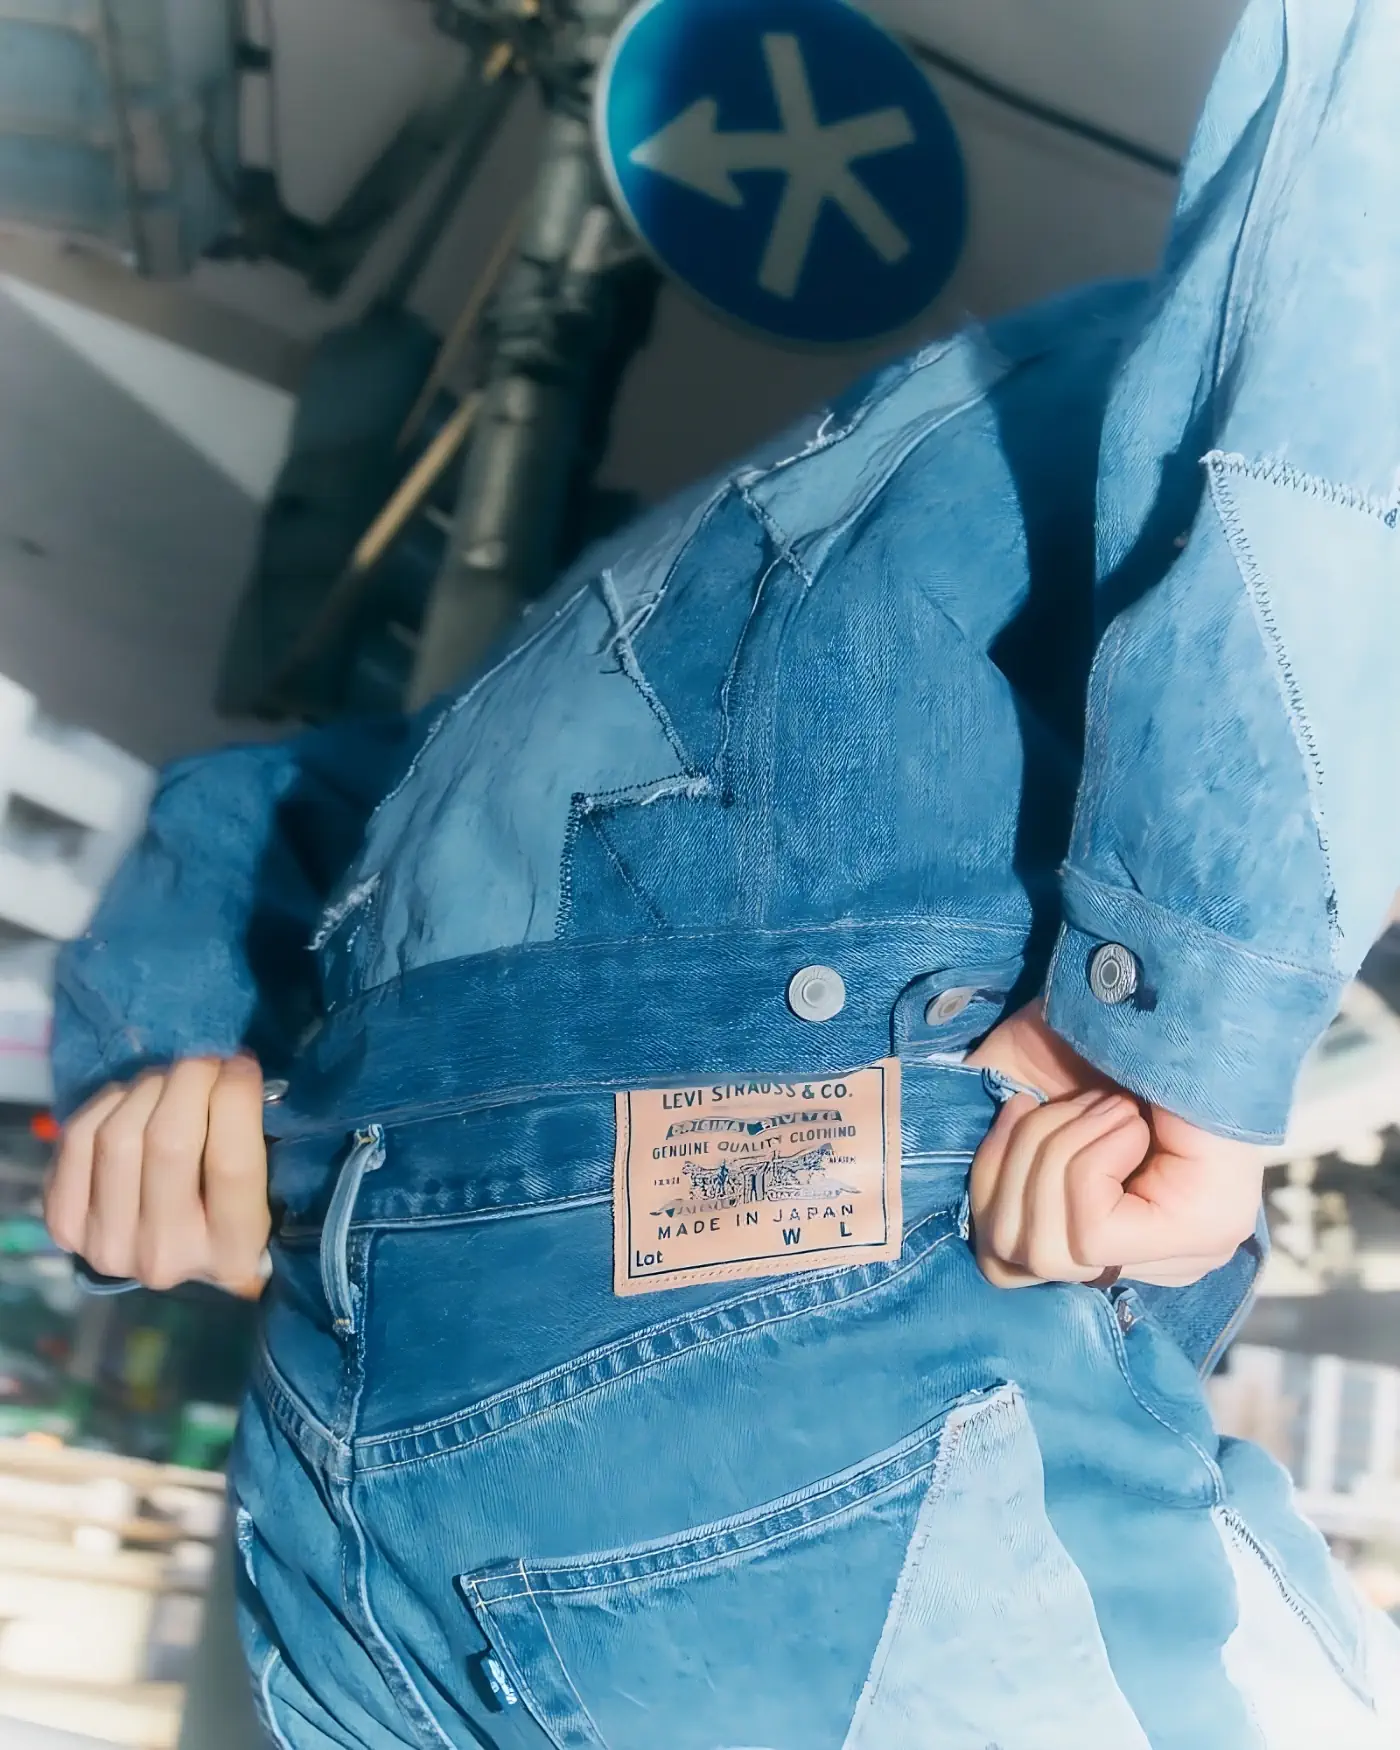 Levi’s Celebrates Craftsmanship with the "Made in Japan" Collection